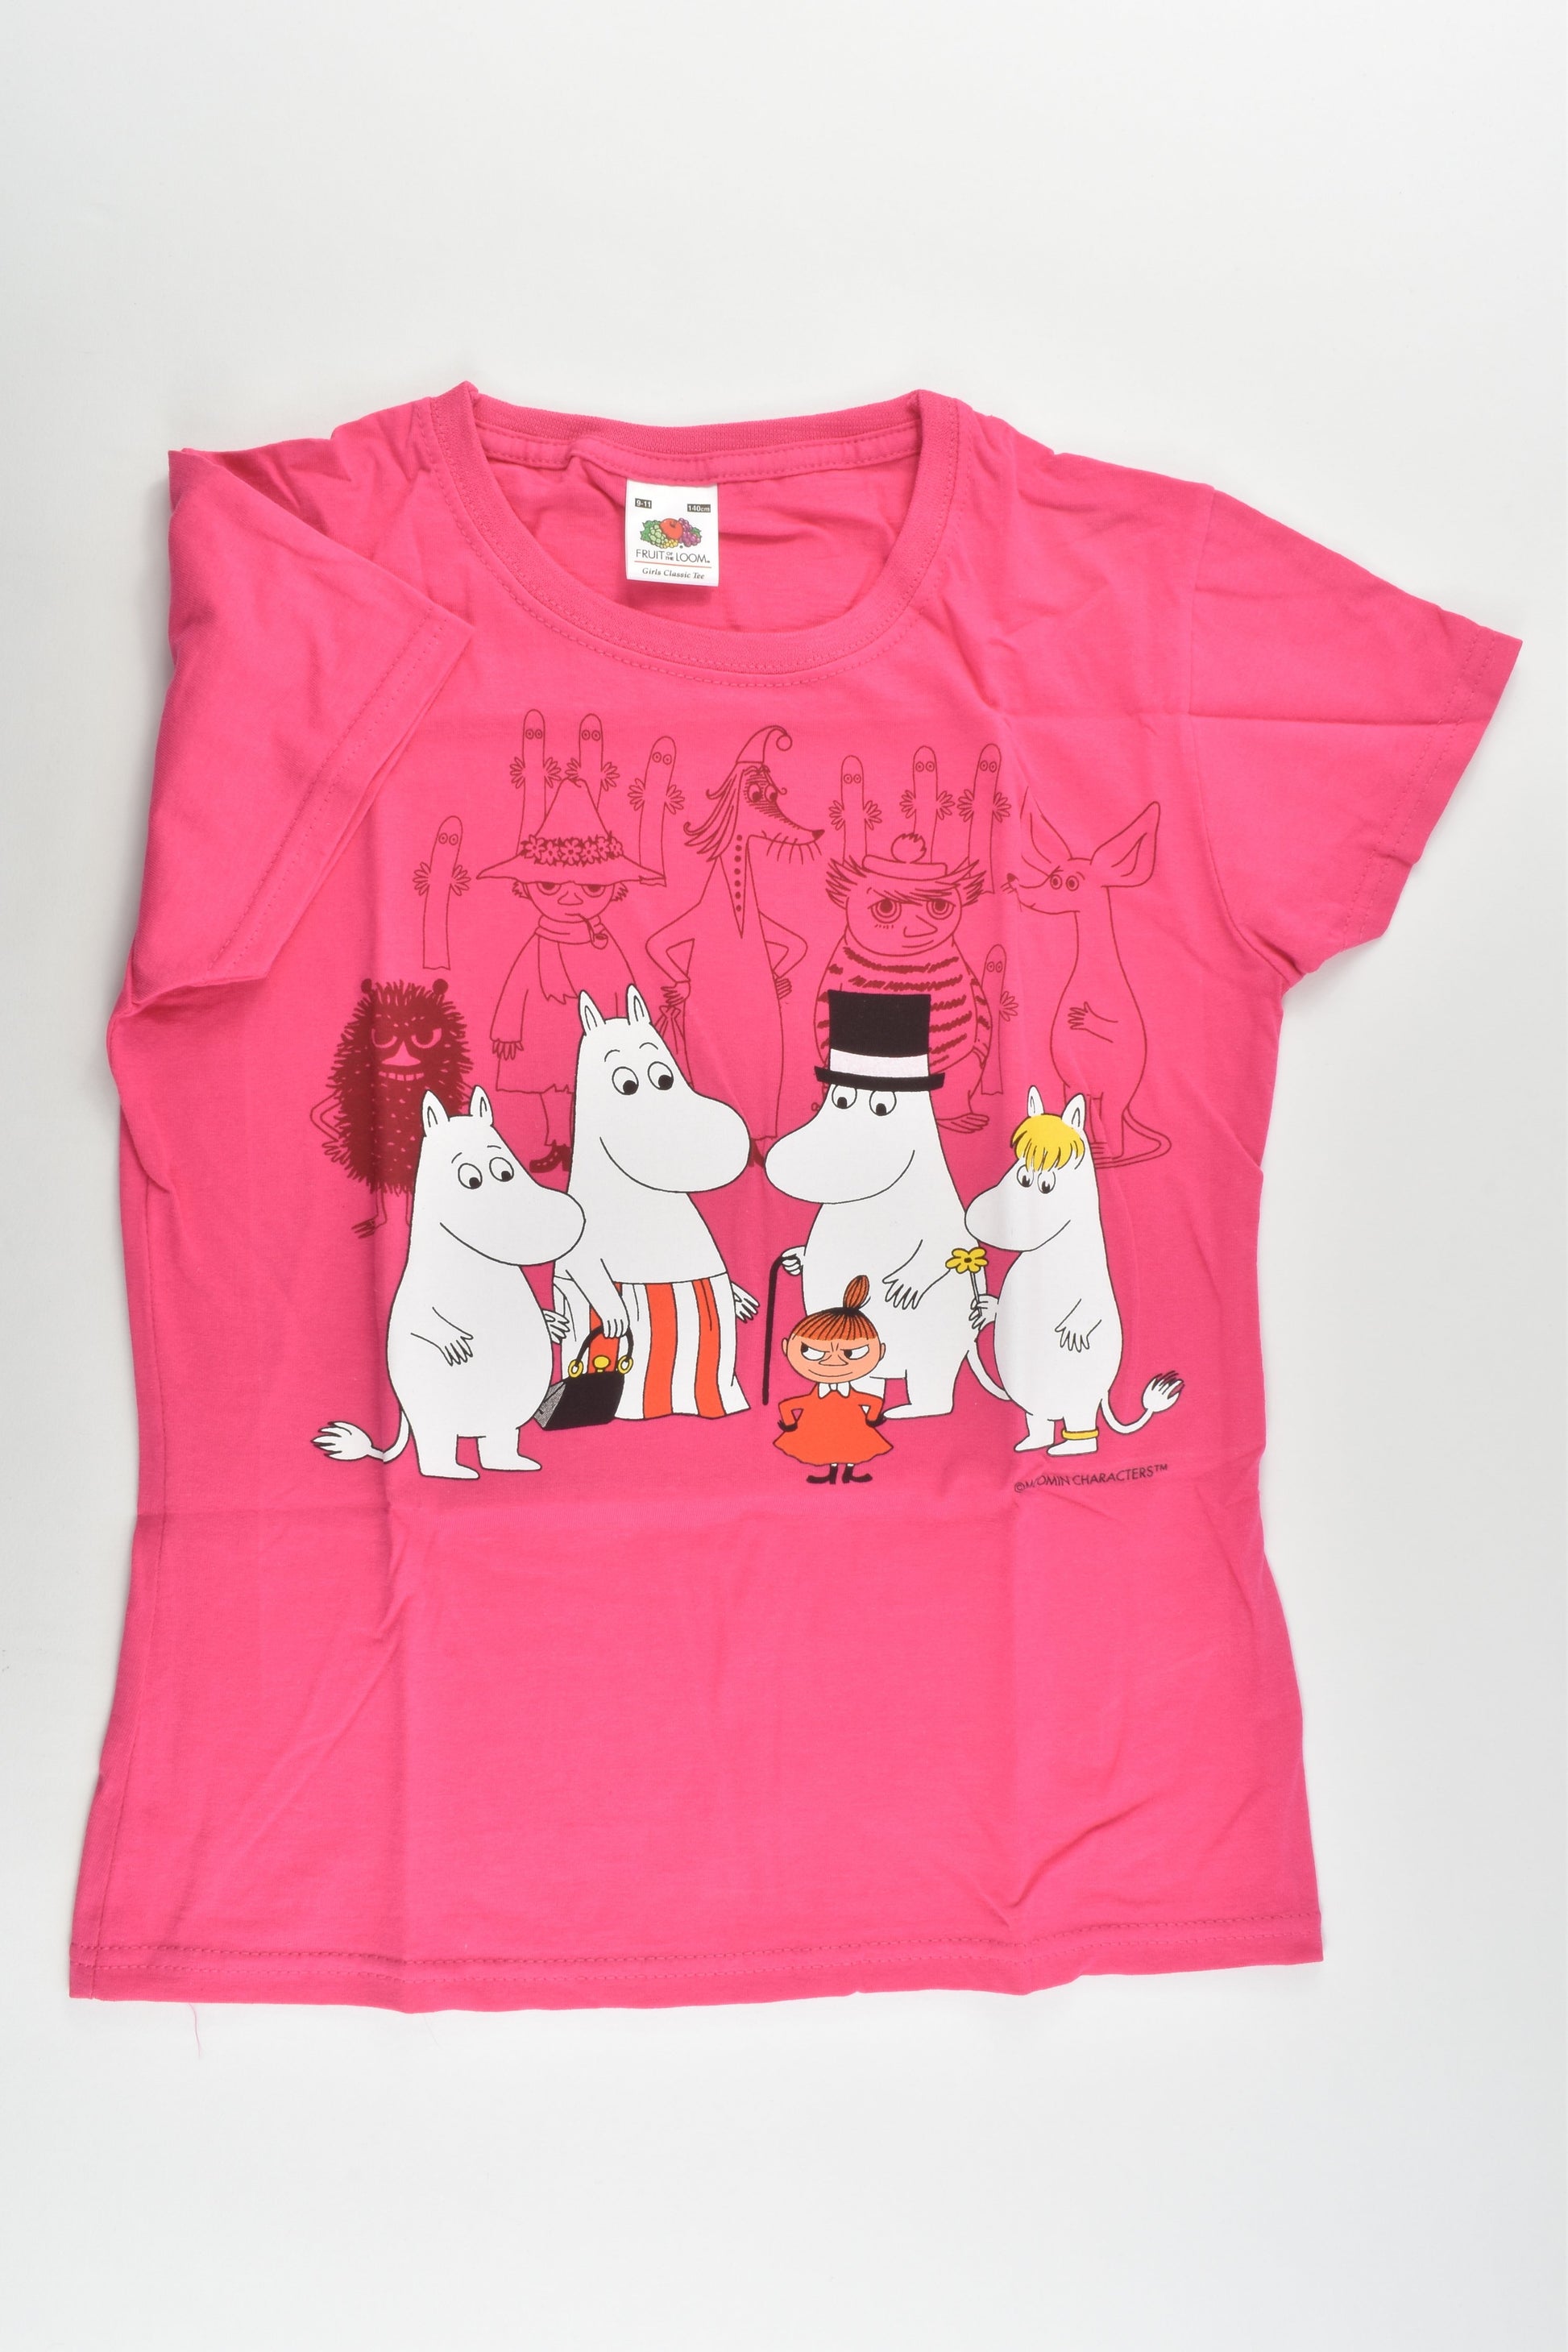 NEW Mikebon (Finland) Size 9-11 (140 cm) Moomin T-shirt